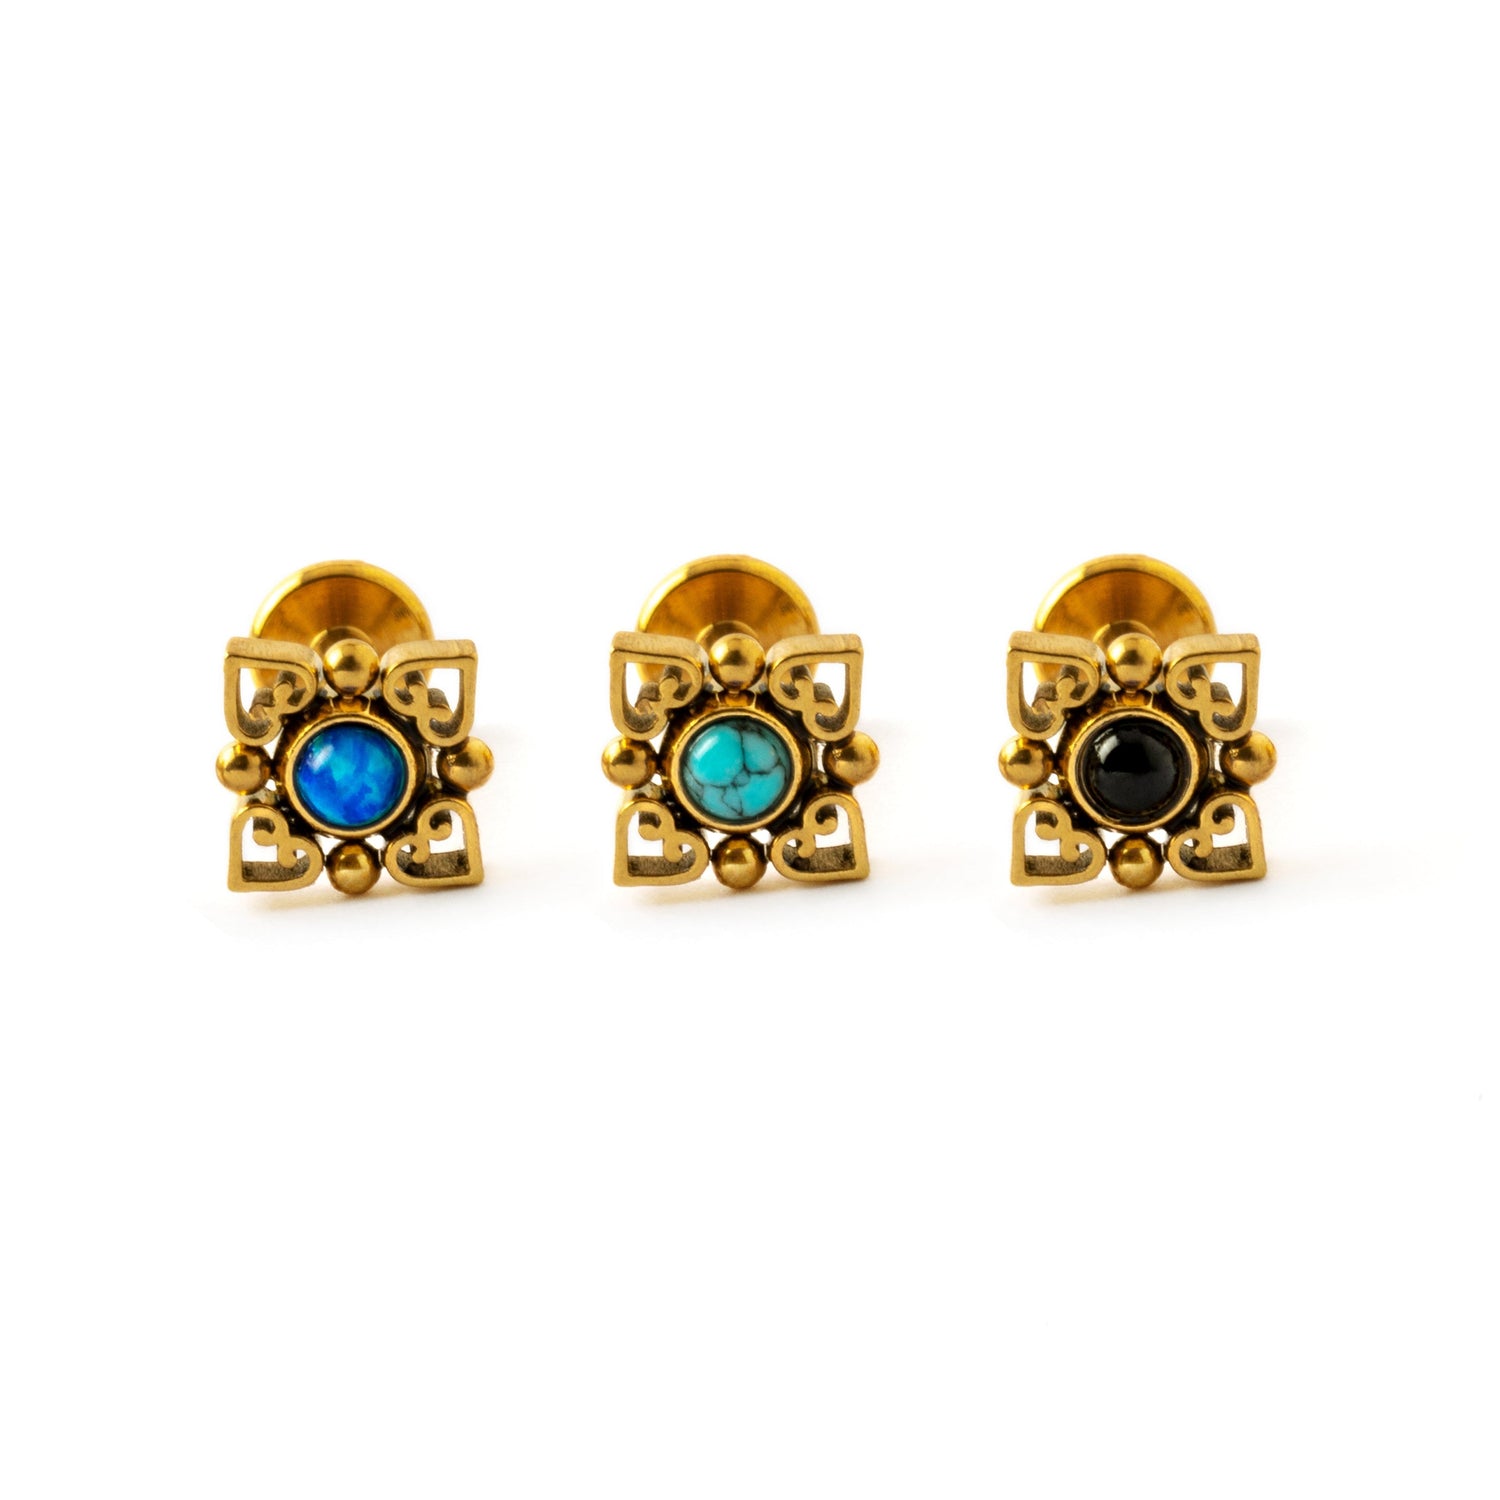 Neptune golden labrets with turquoise, black onyx, blue opal frontal view